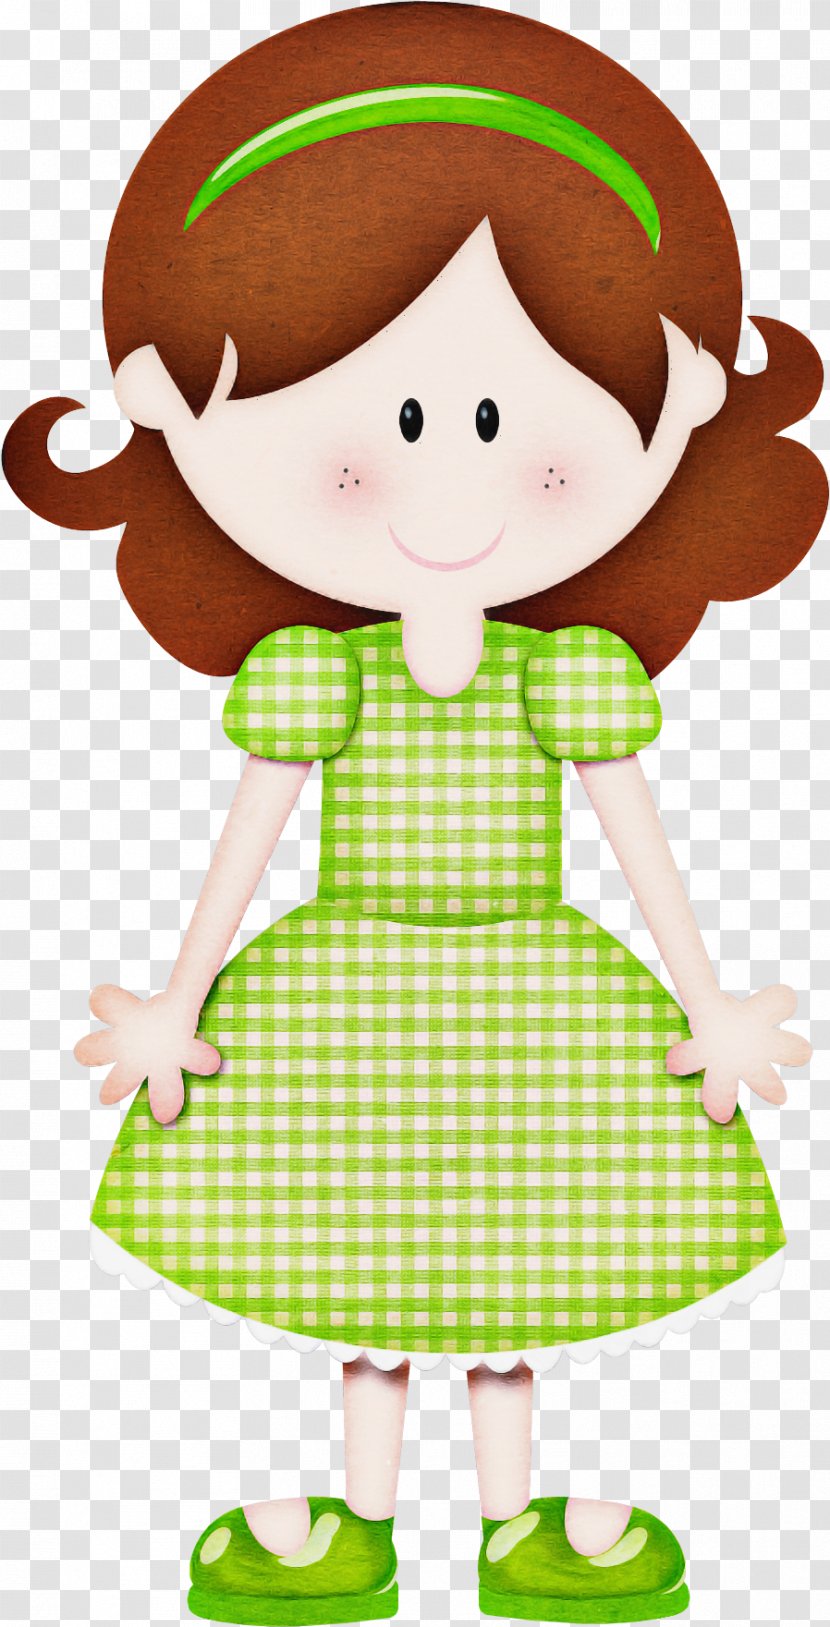 Cartoon Green Doll Toy Transparent PNG